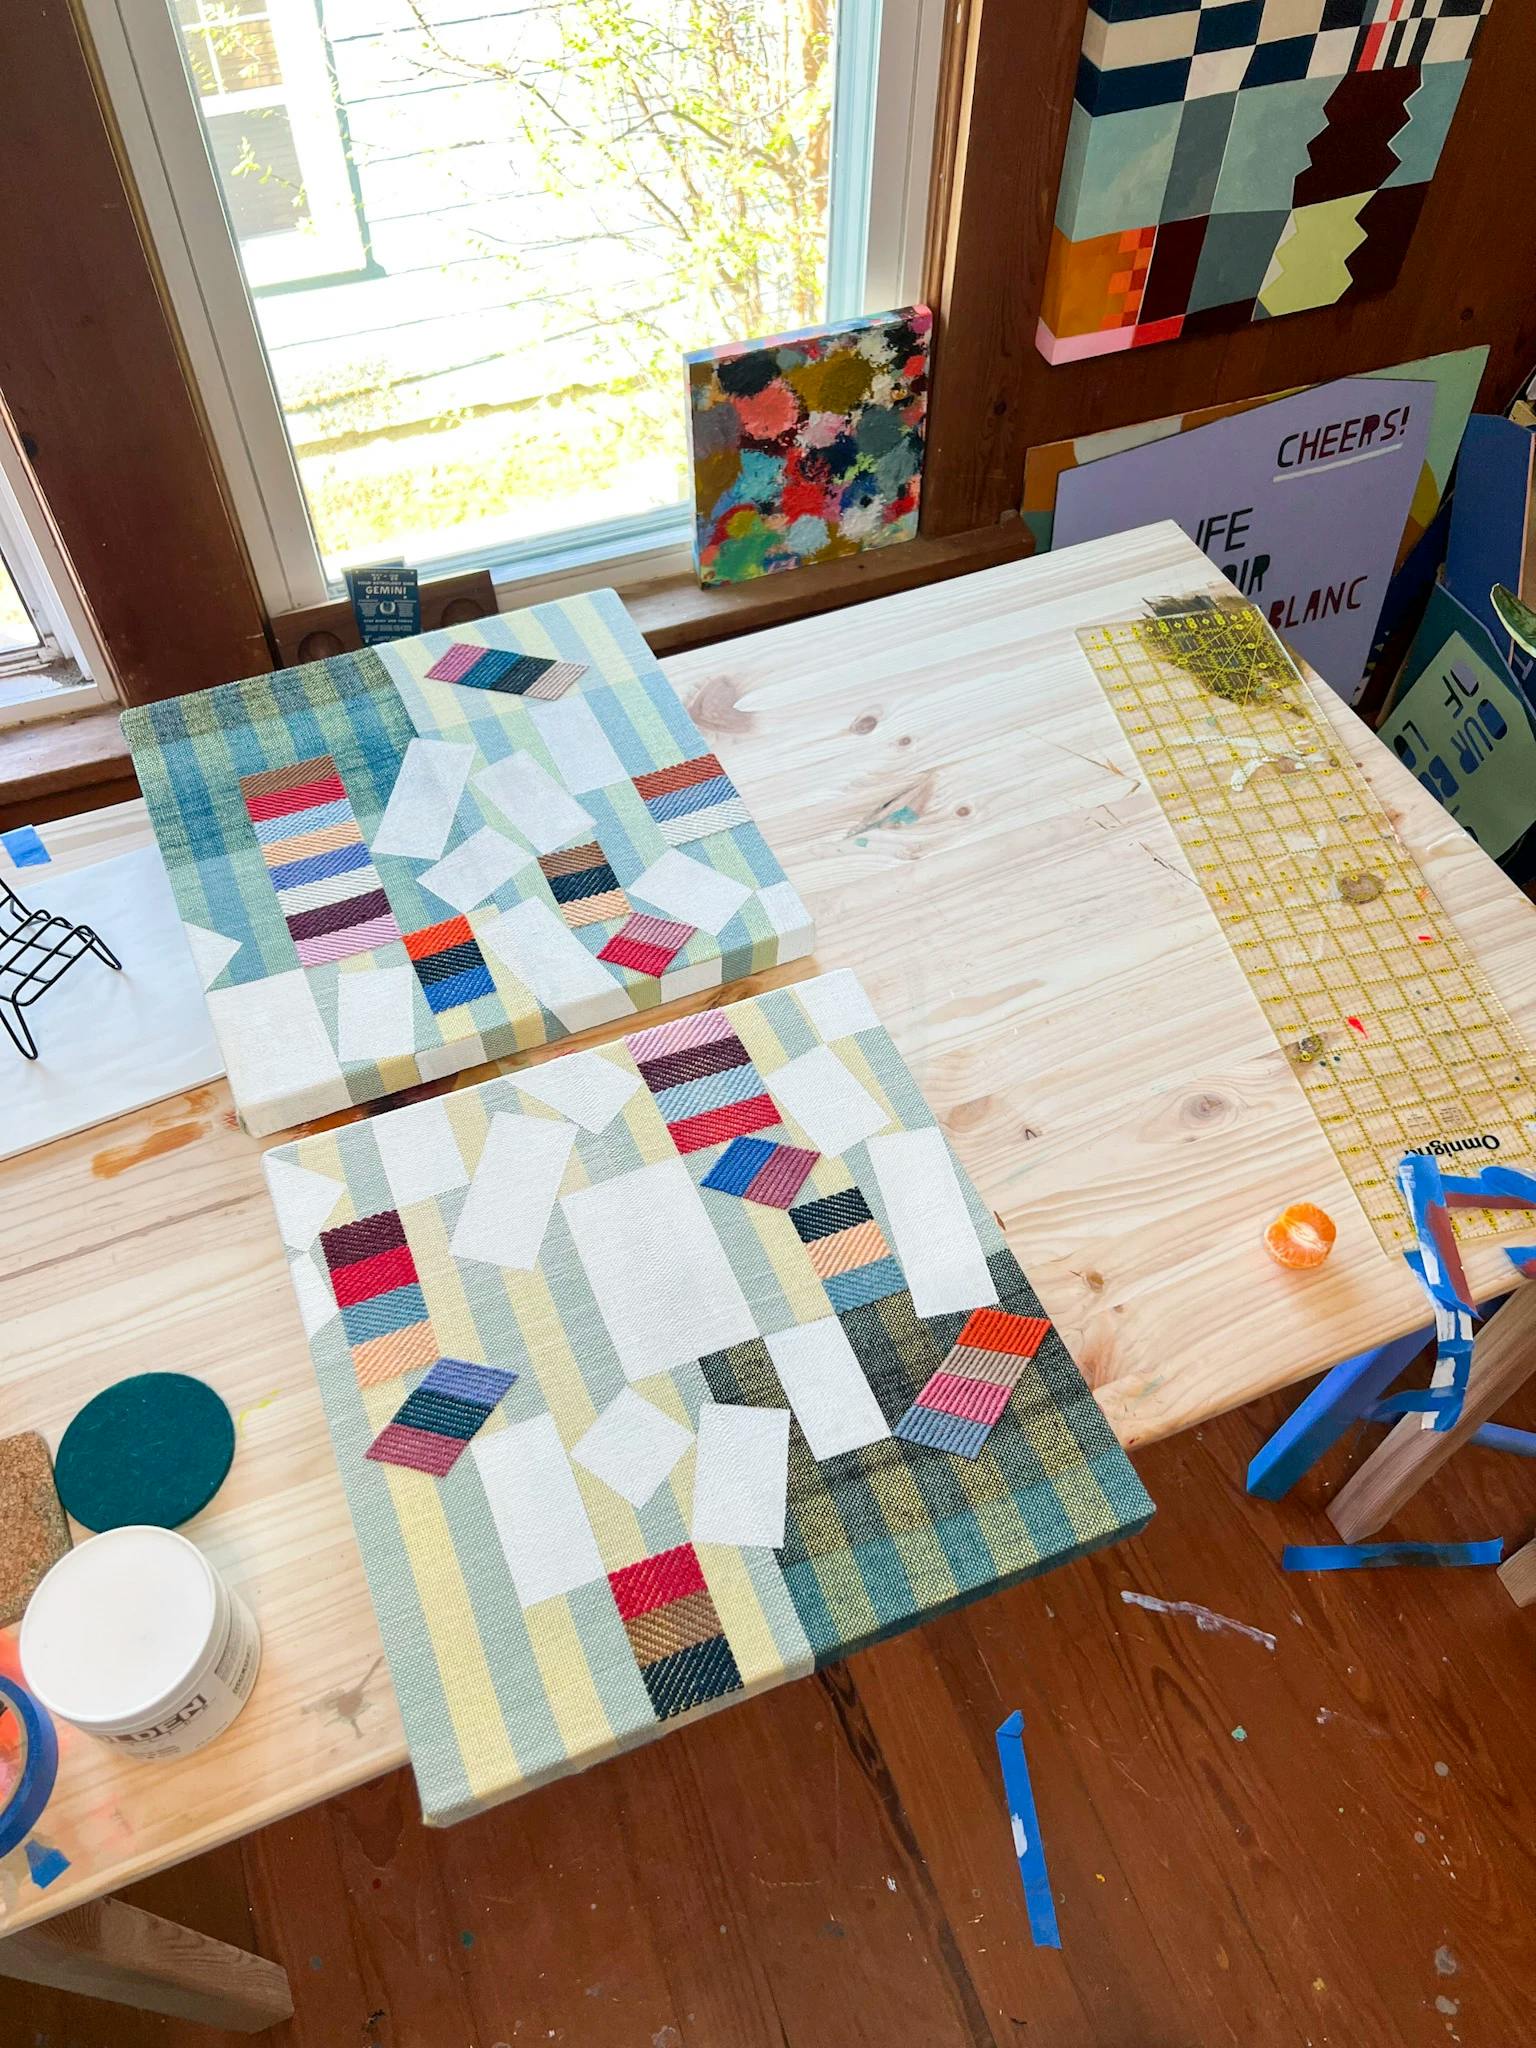 An aerial view of two striped, woven and painted pieces by artist Sarah Sullivan Sherrod on a wooden table in her light-filled studio.